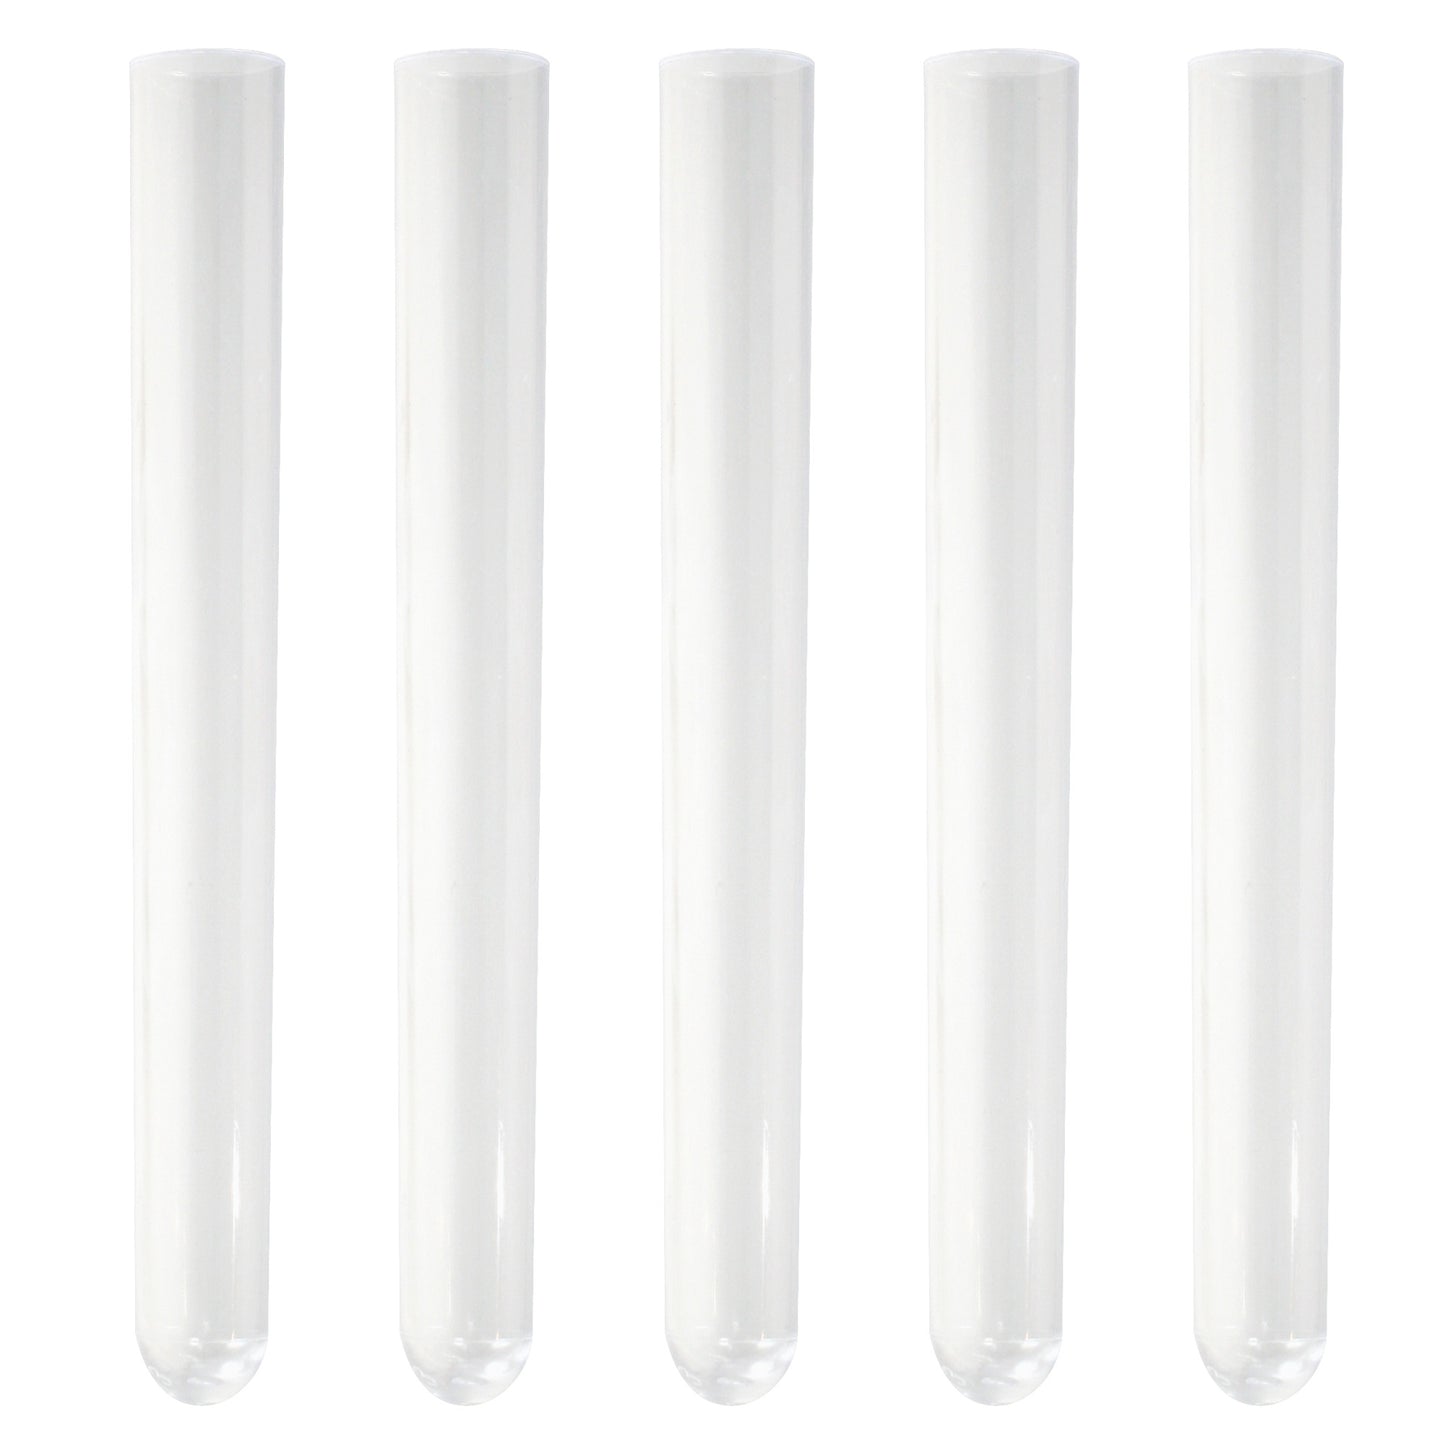 CR-1610CL - Bar Maid Shooter Tubes, Clear - 100 Pieces/Pack